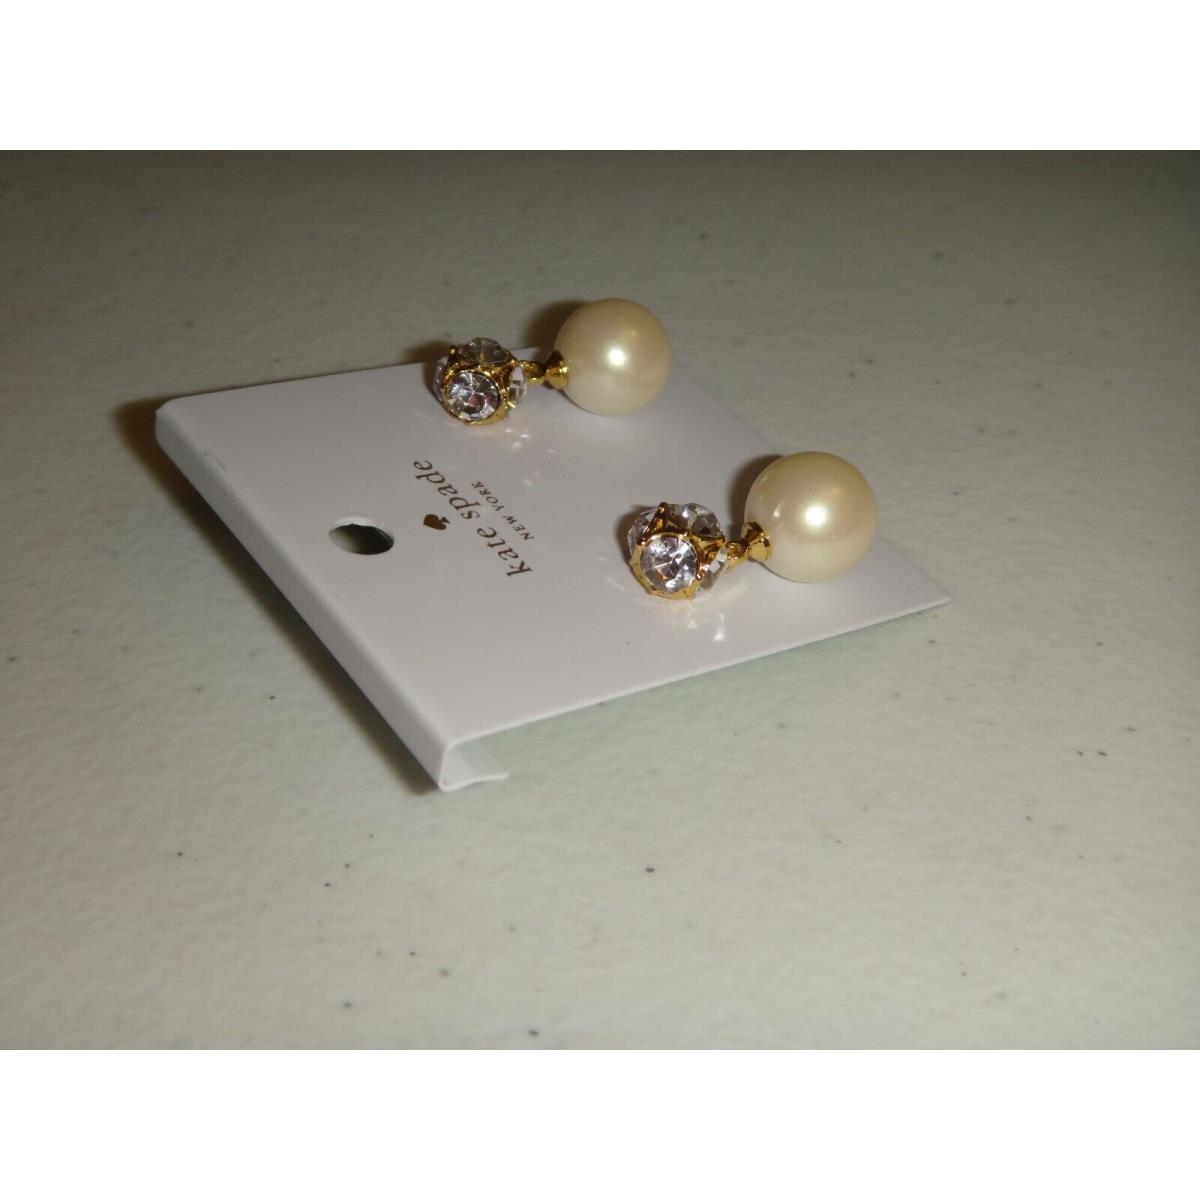 Kate Spade Lady Marmalade Drop Earrings Cream Pearl Crystals Gold Tone S/  Steel - Kate Spade jewelry - 098686649743 | Fash Brands